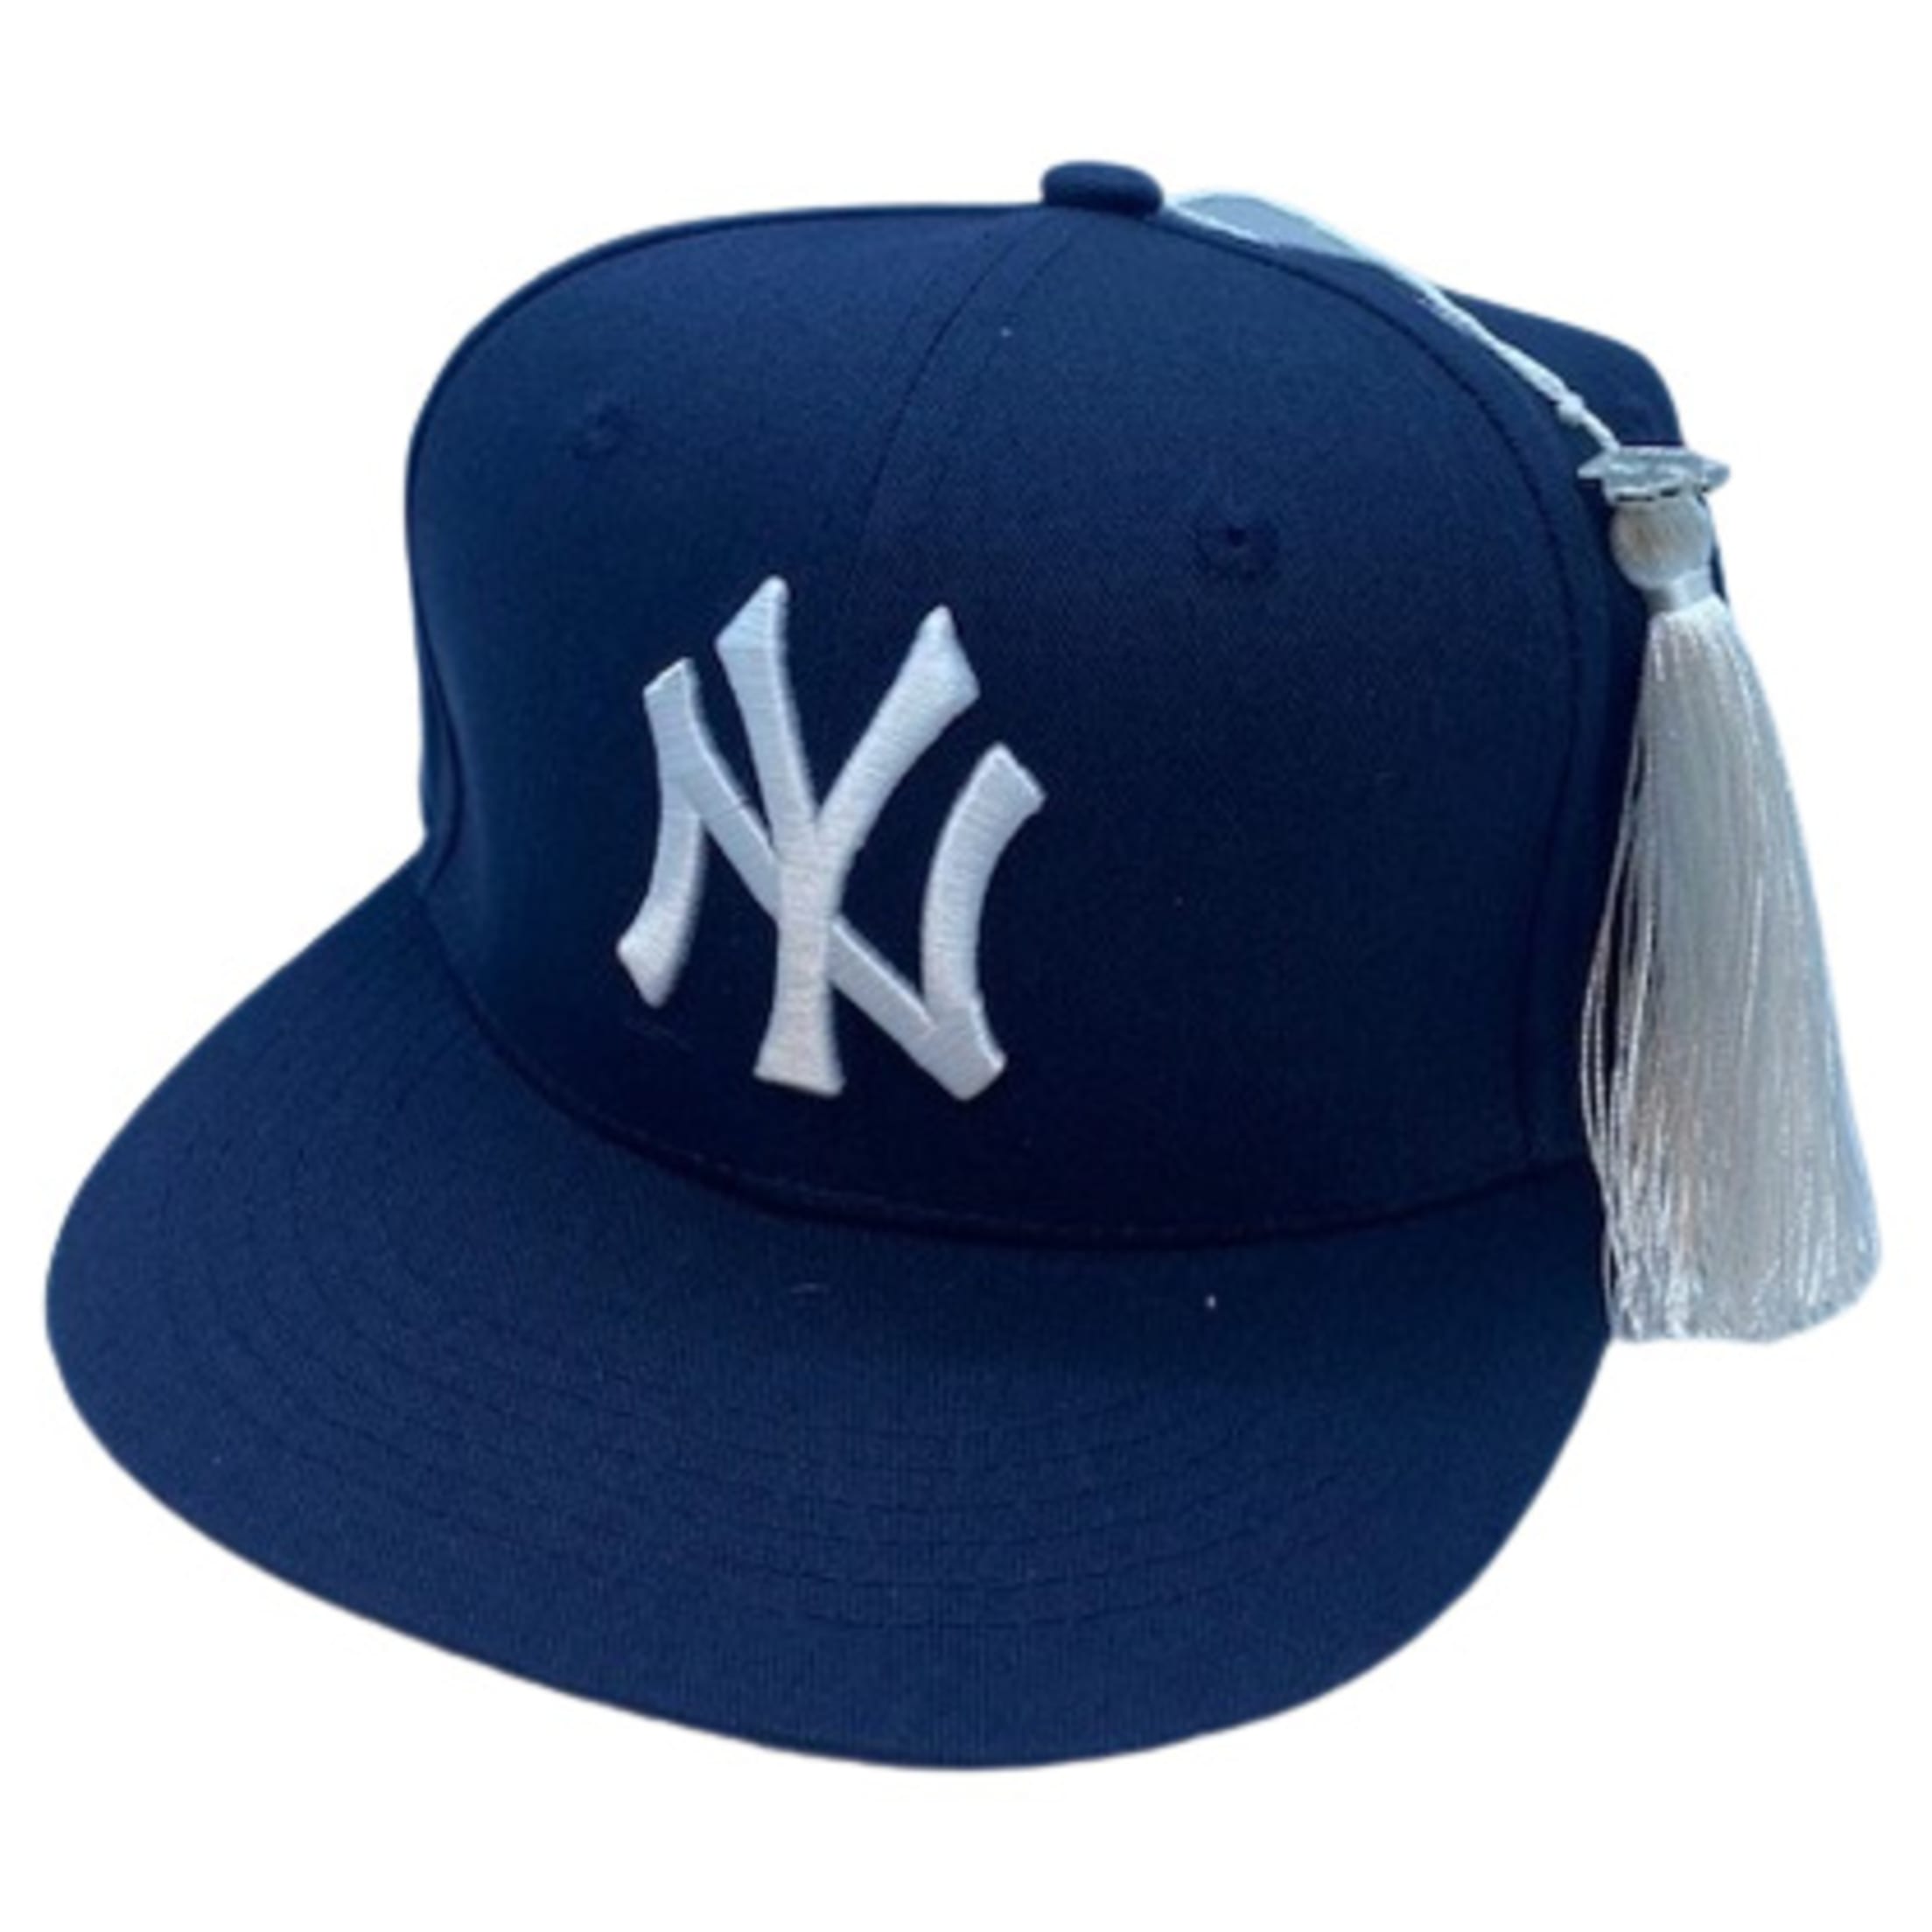 Special Event Tickets at Yankee Stadium | New York Yankees